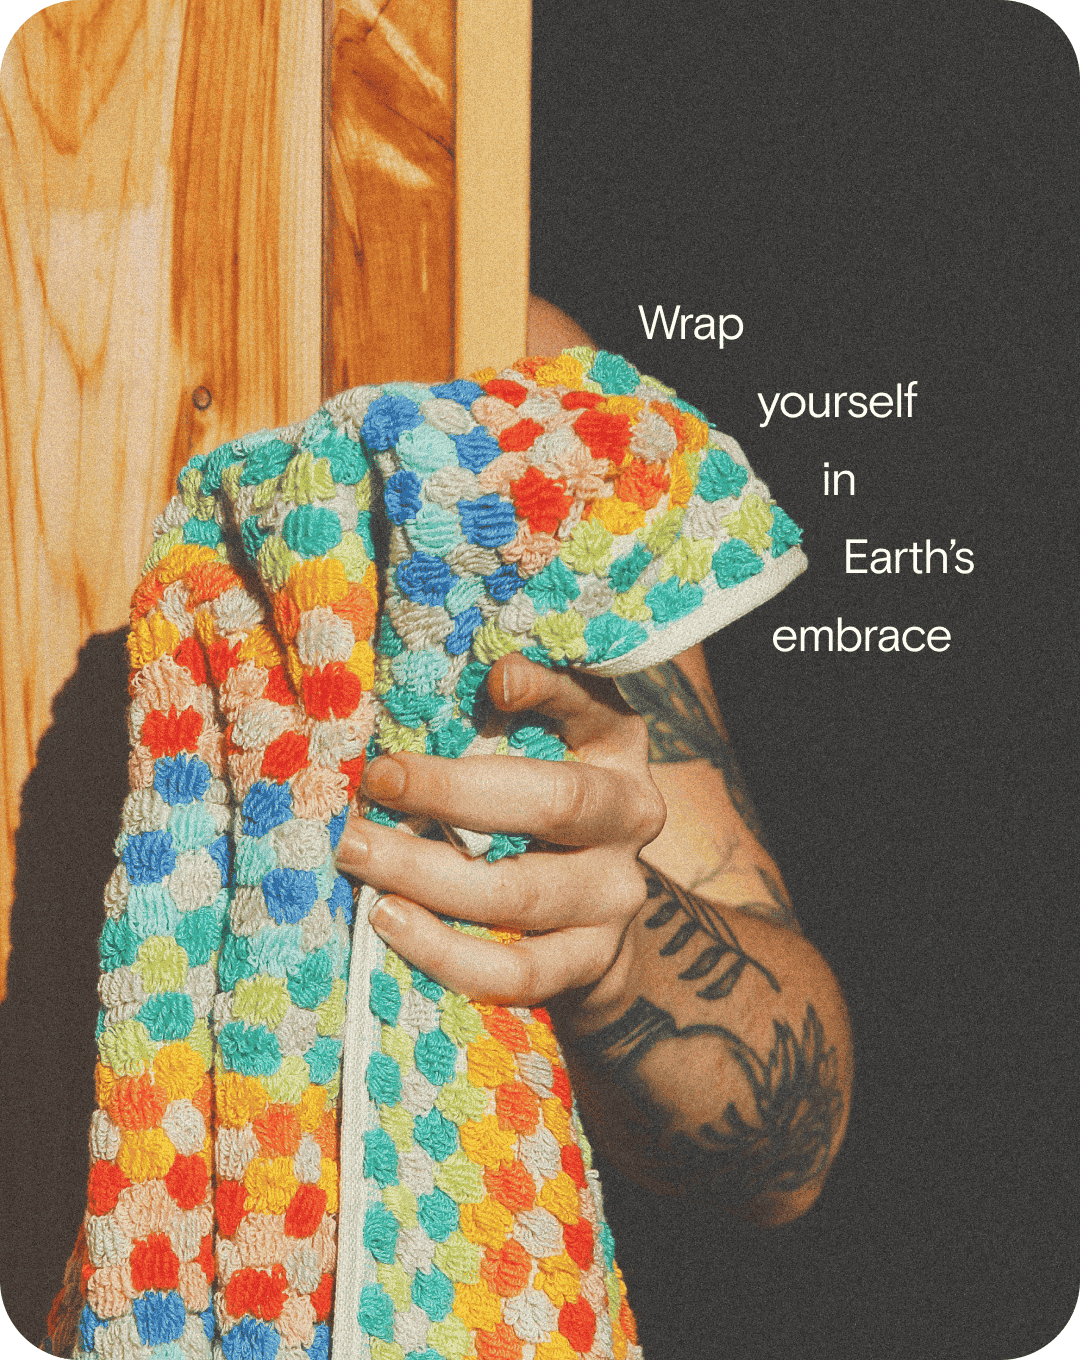 Wrap yourself in Earth's embrace